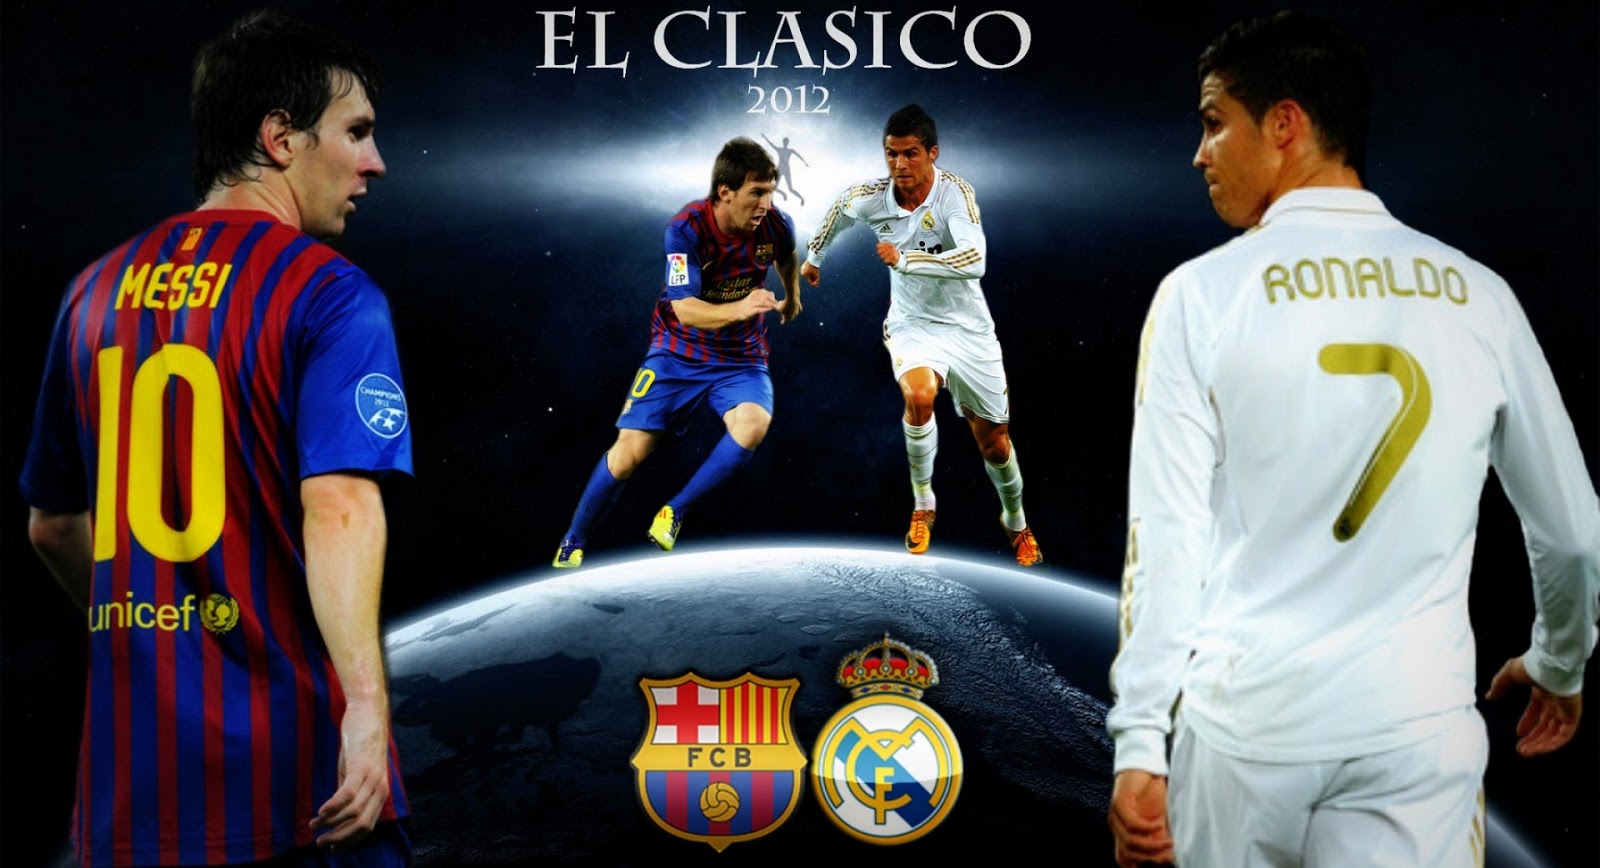  other wallpapers of Messi VS Ronaldo Wallpapers as often as possible